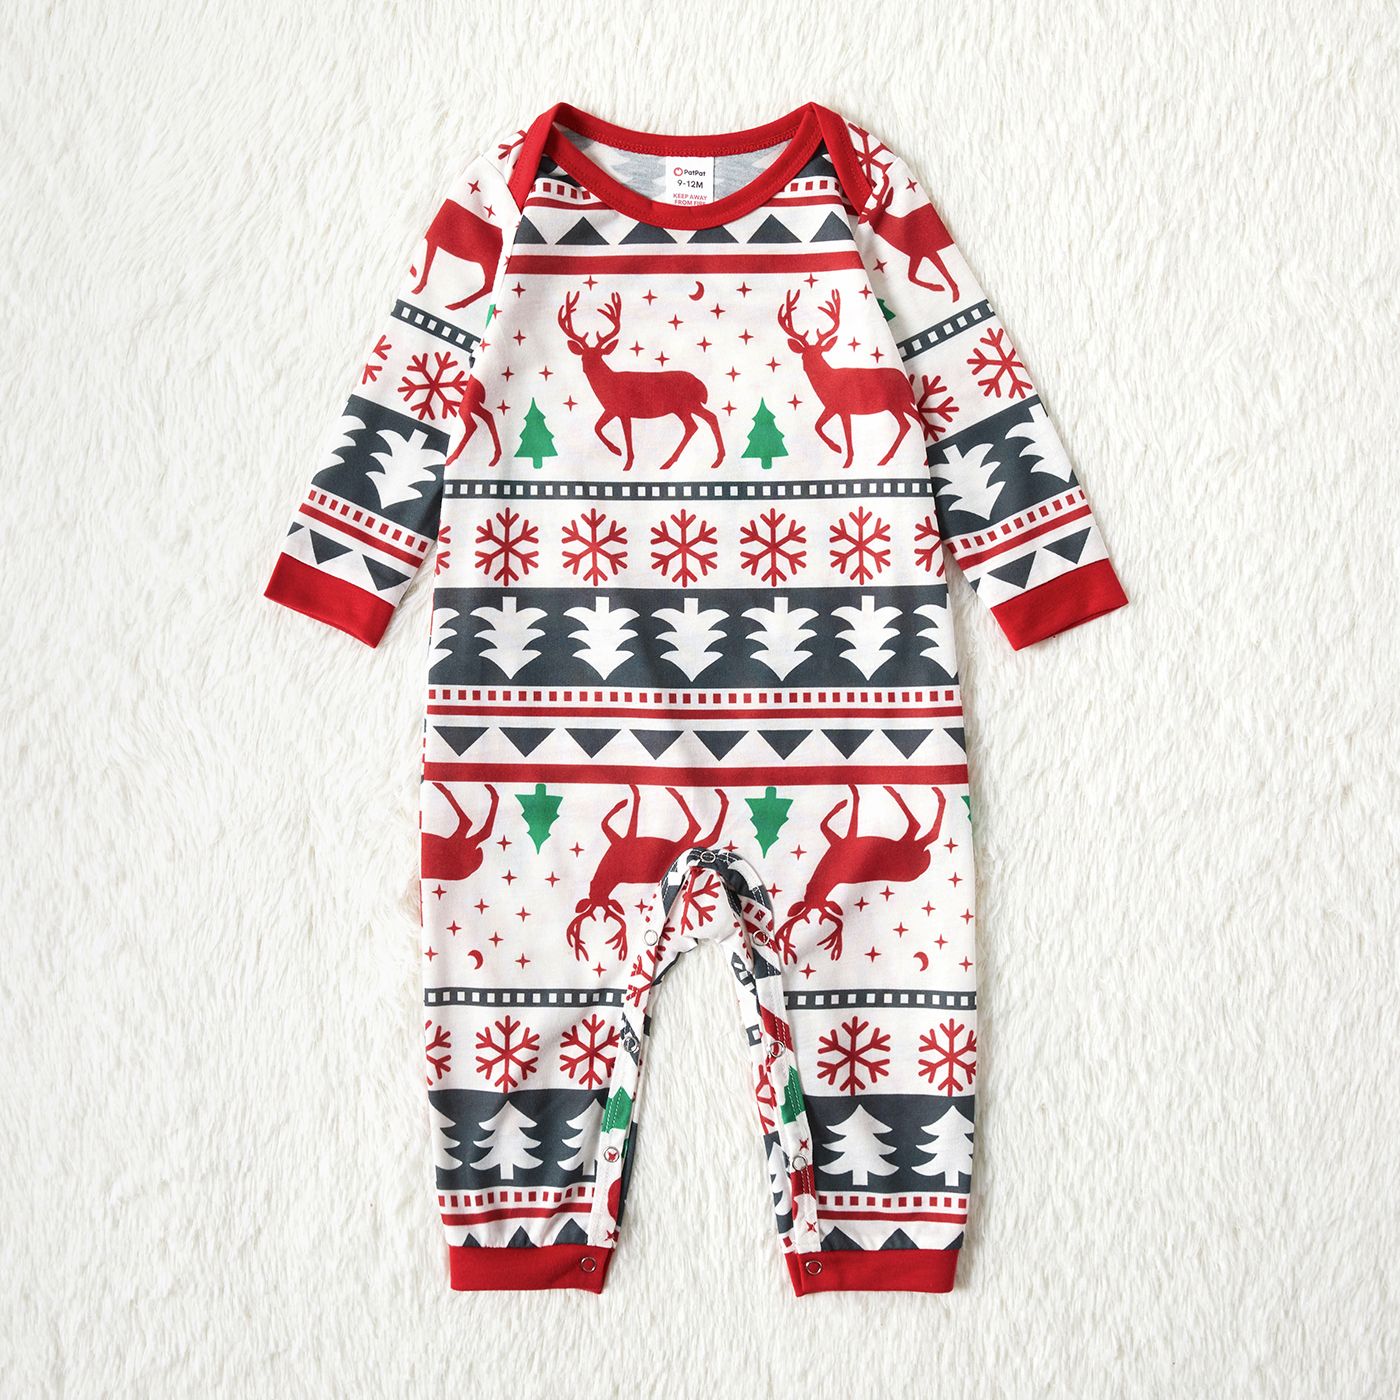 Christmas Reindeer and Letter Print Red Plaid Family Matching Long-sleeve Hooded Onesies Pajamas Sets (Flame Resistant)